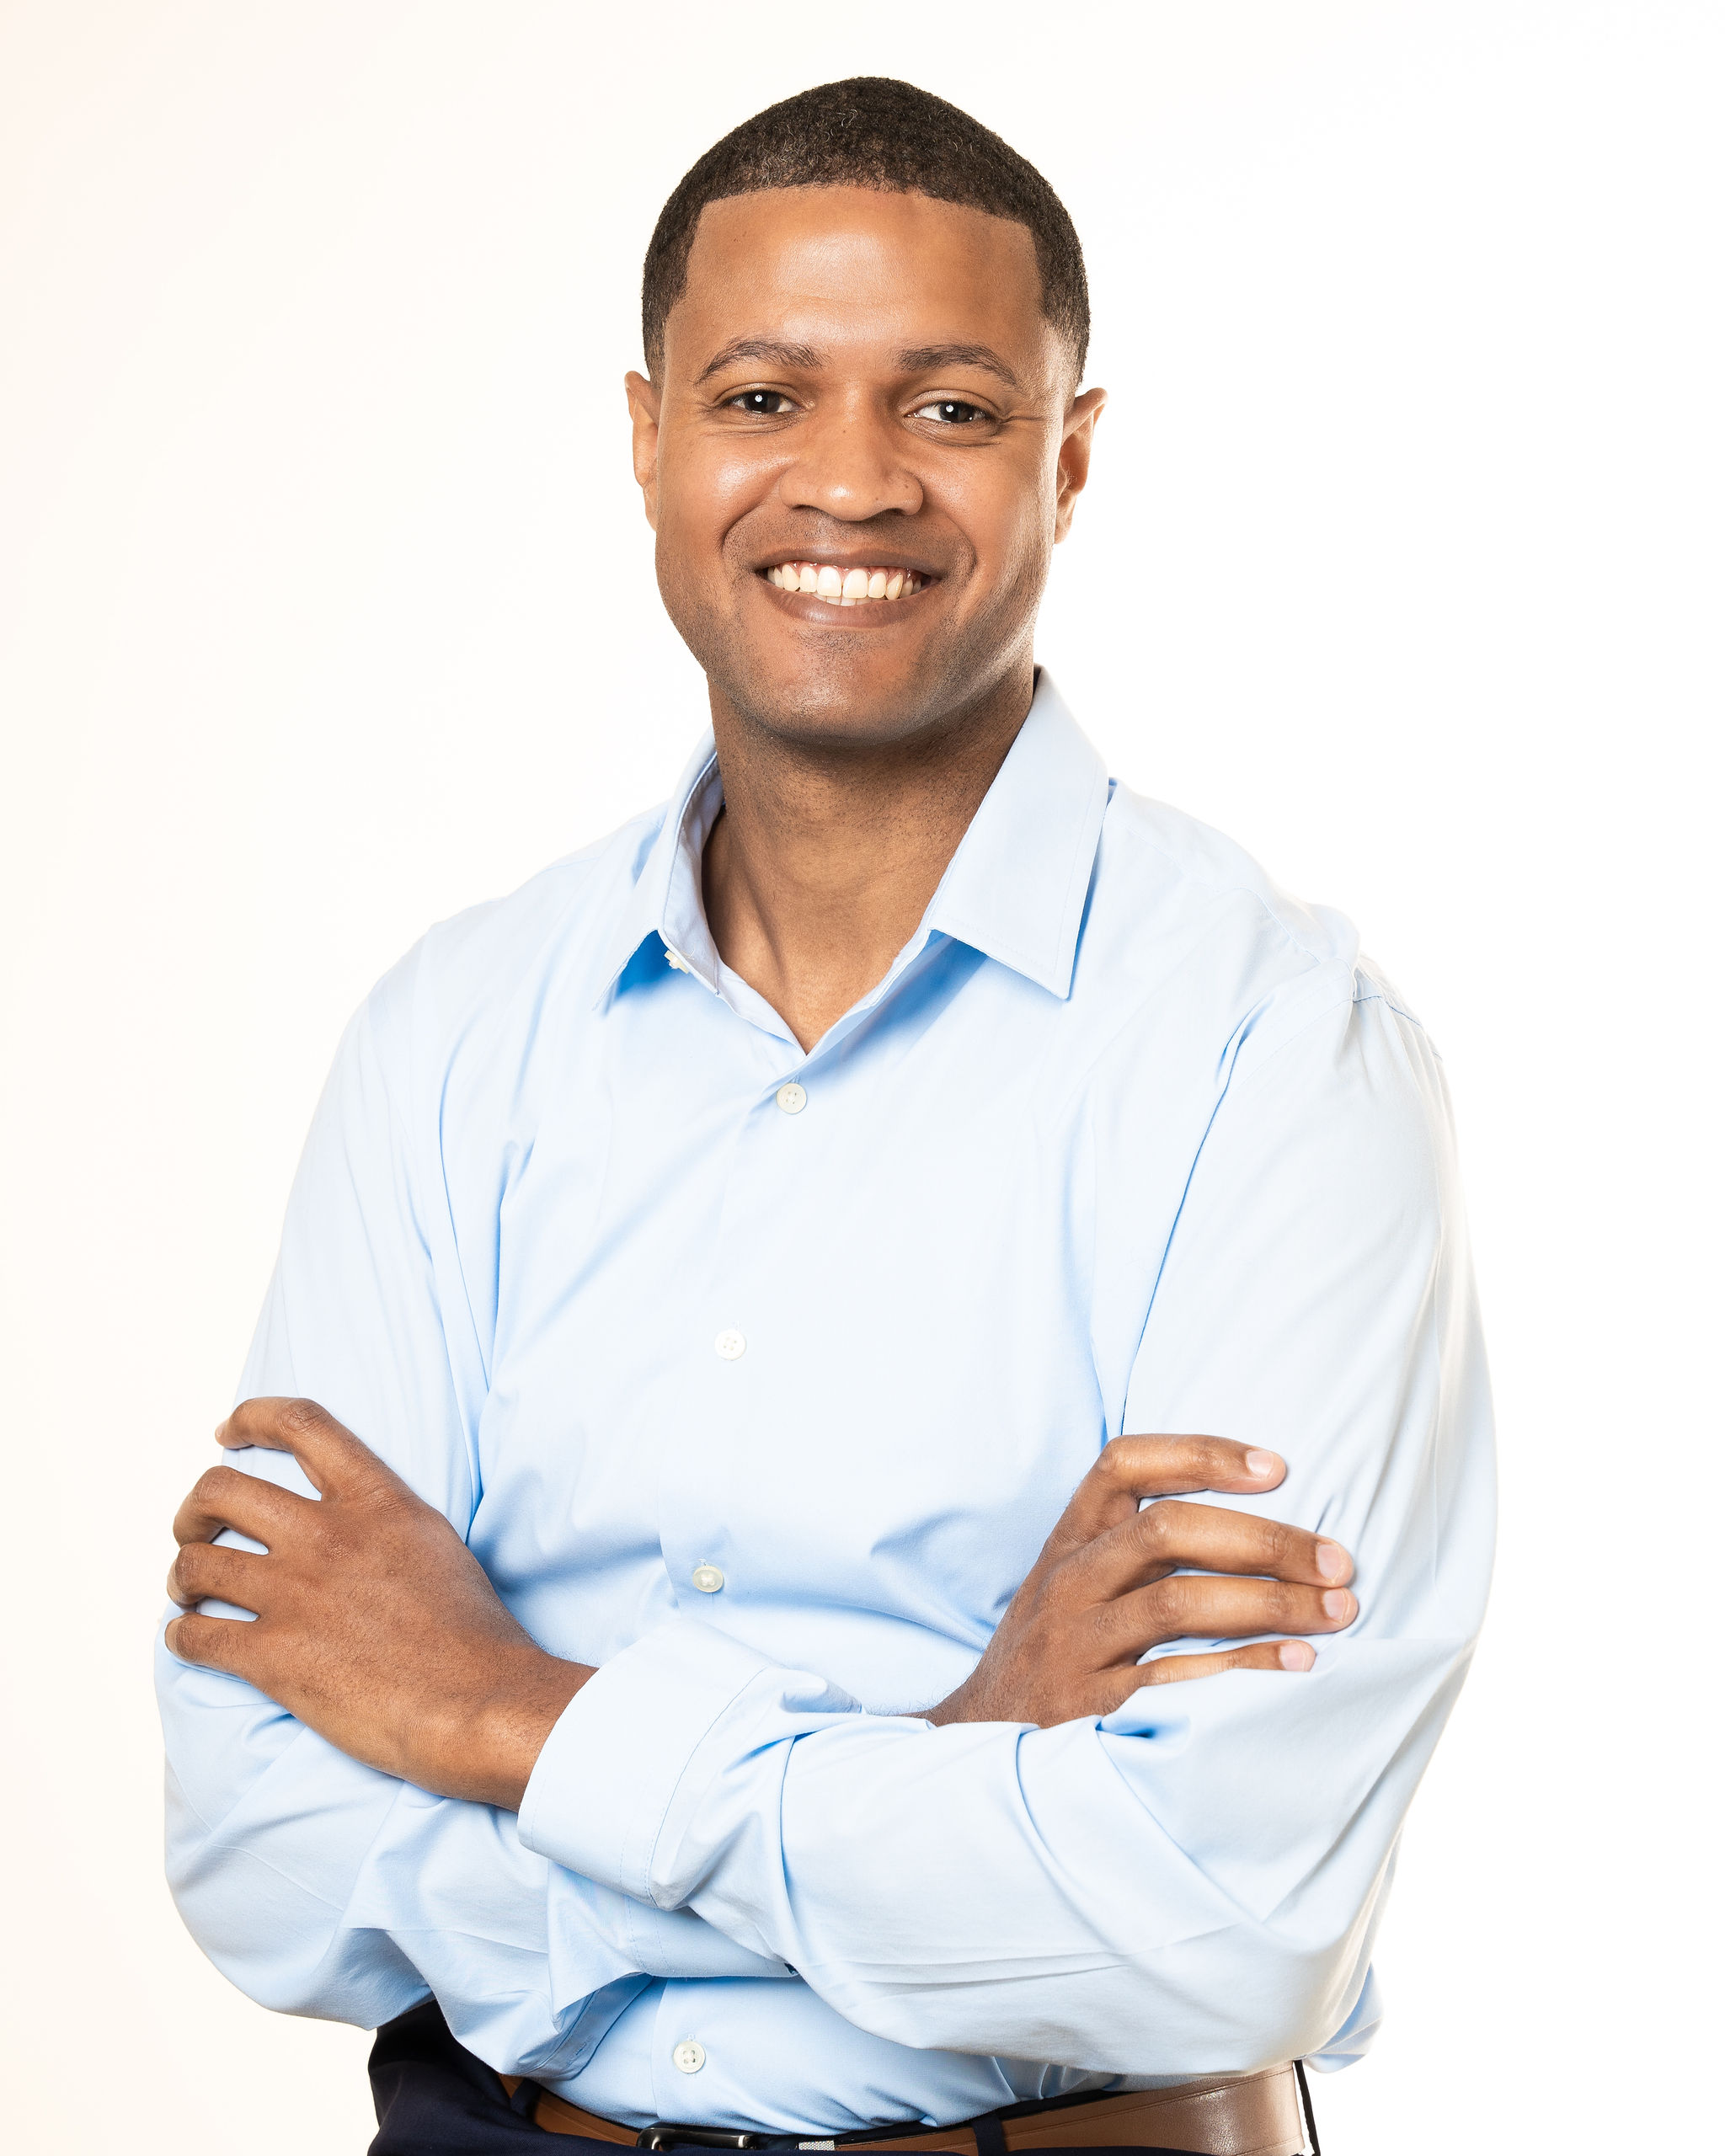 Portrait of Brian Wasson. Brian is a black man with short black hair. He is wearing a light blue shirt and smiling at the camera.